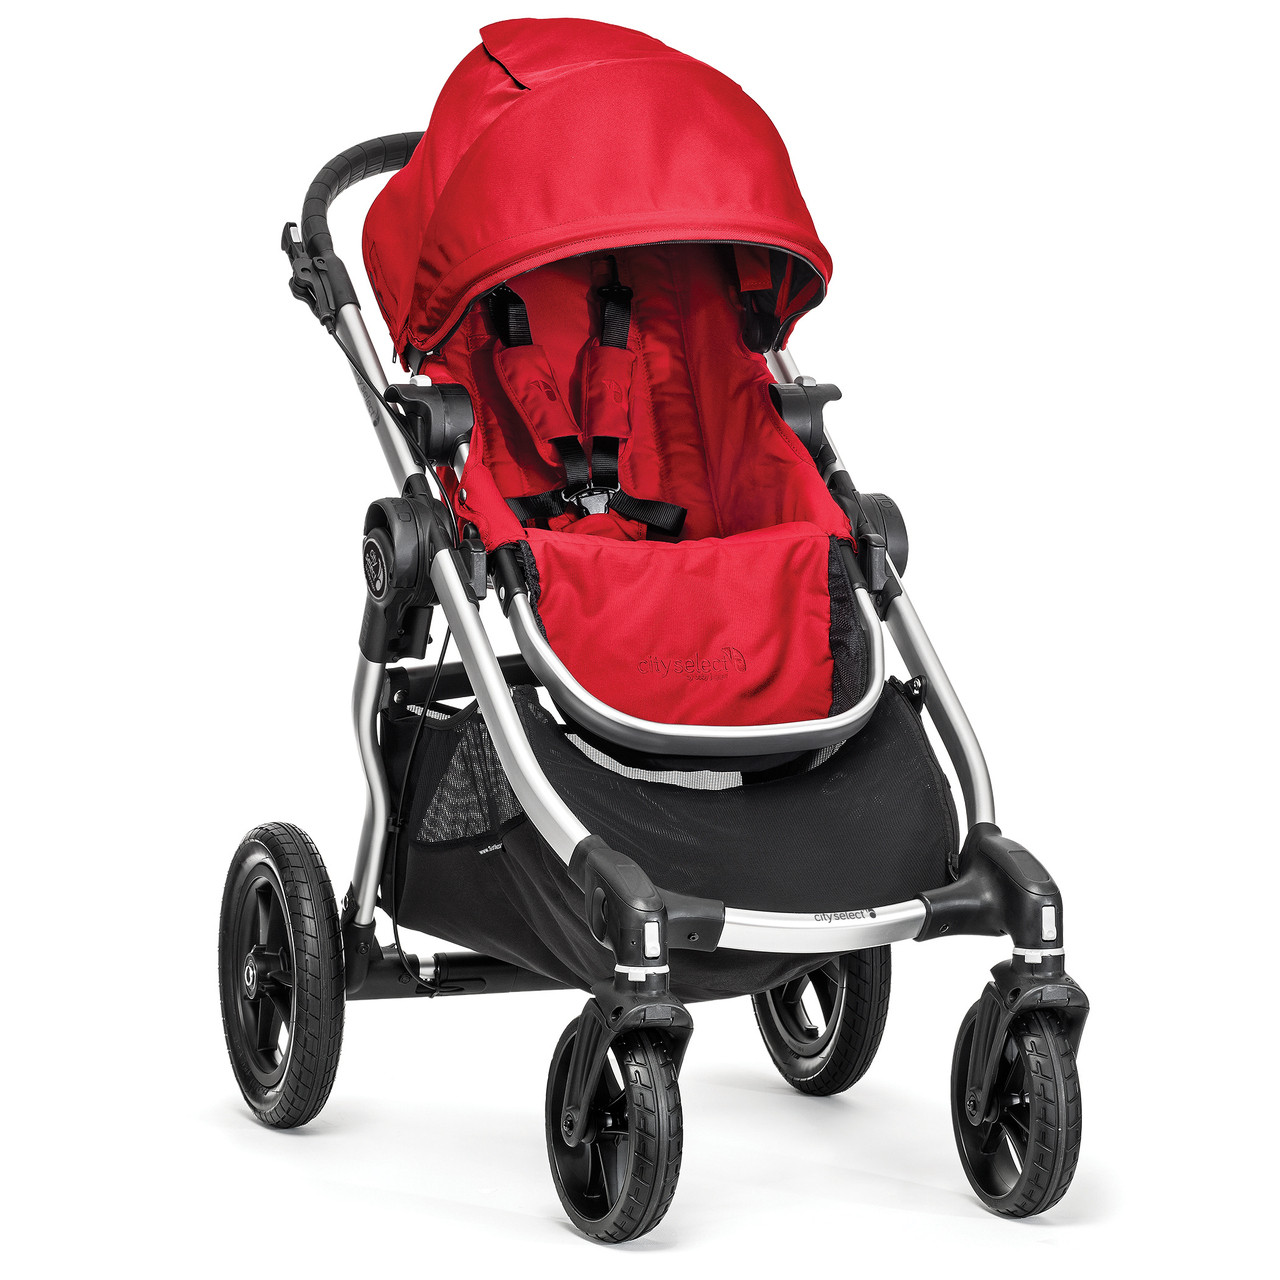 Baby Jogger Select Stroller 2018 Ruby - SHIPS NOW - City Select Strollers